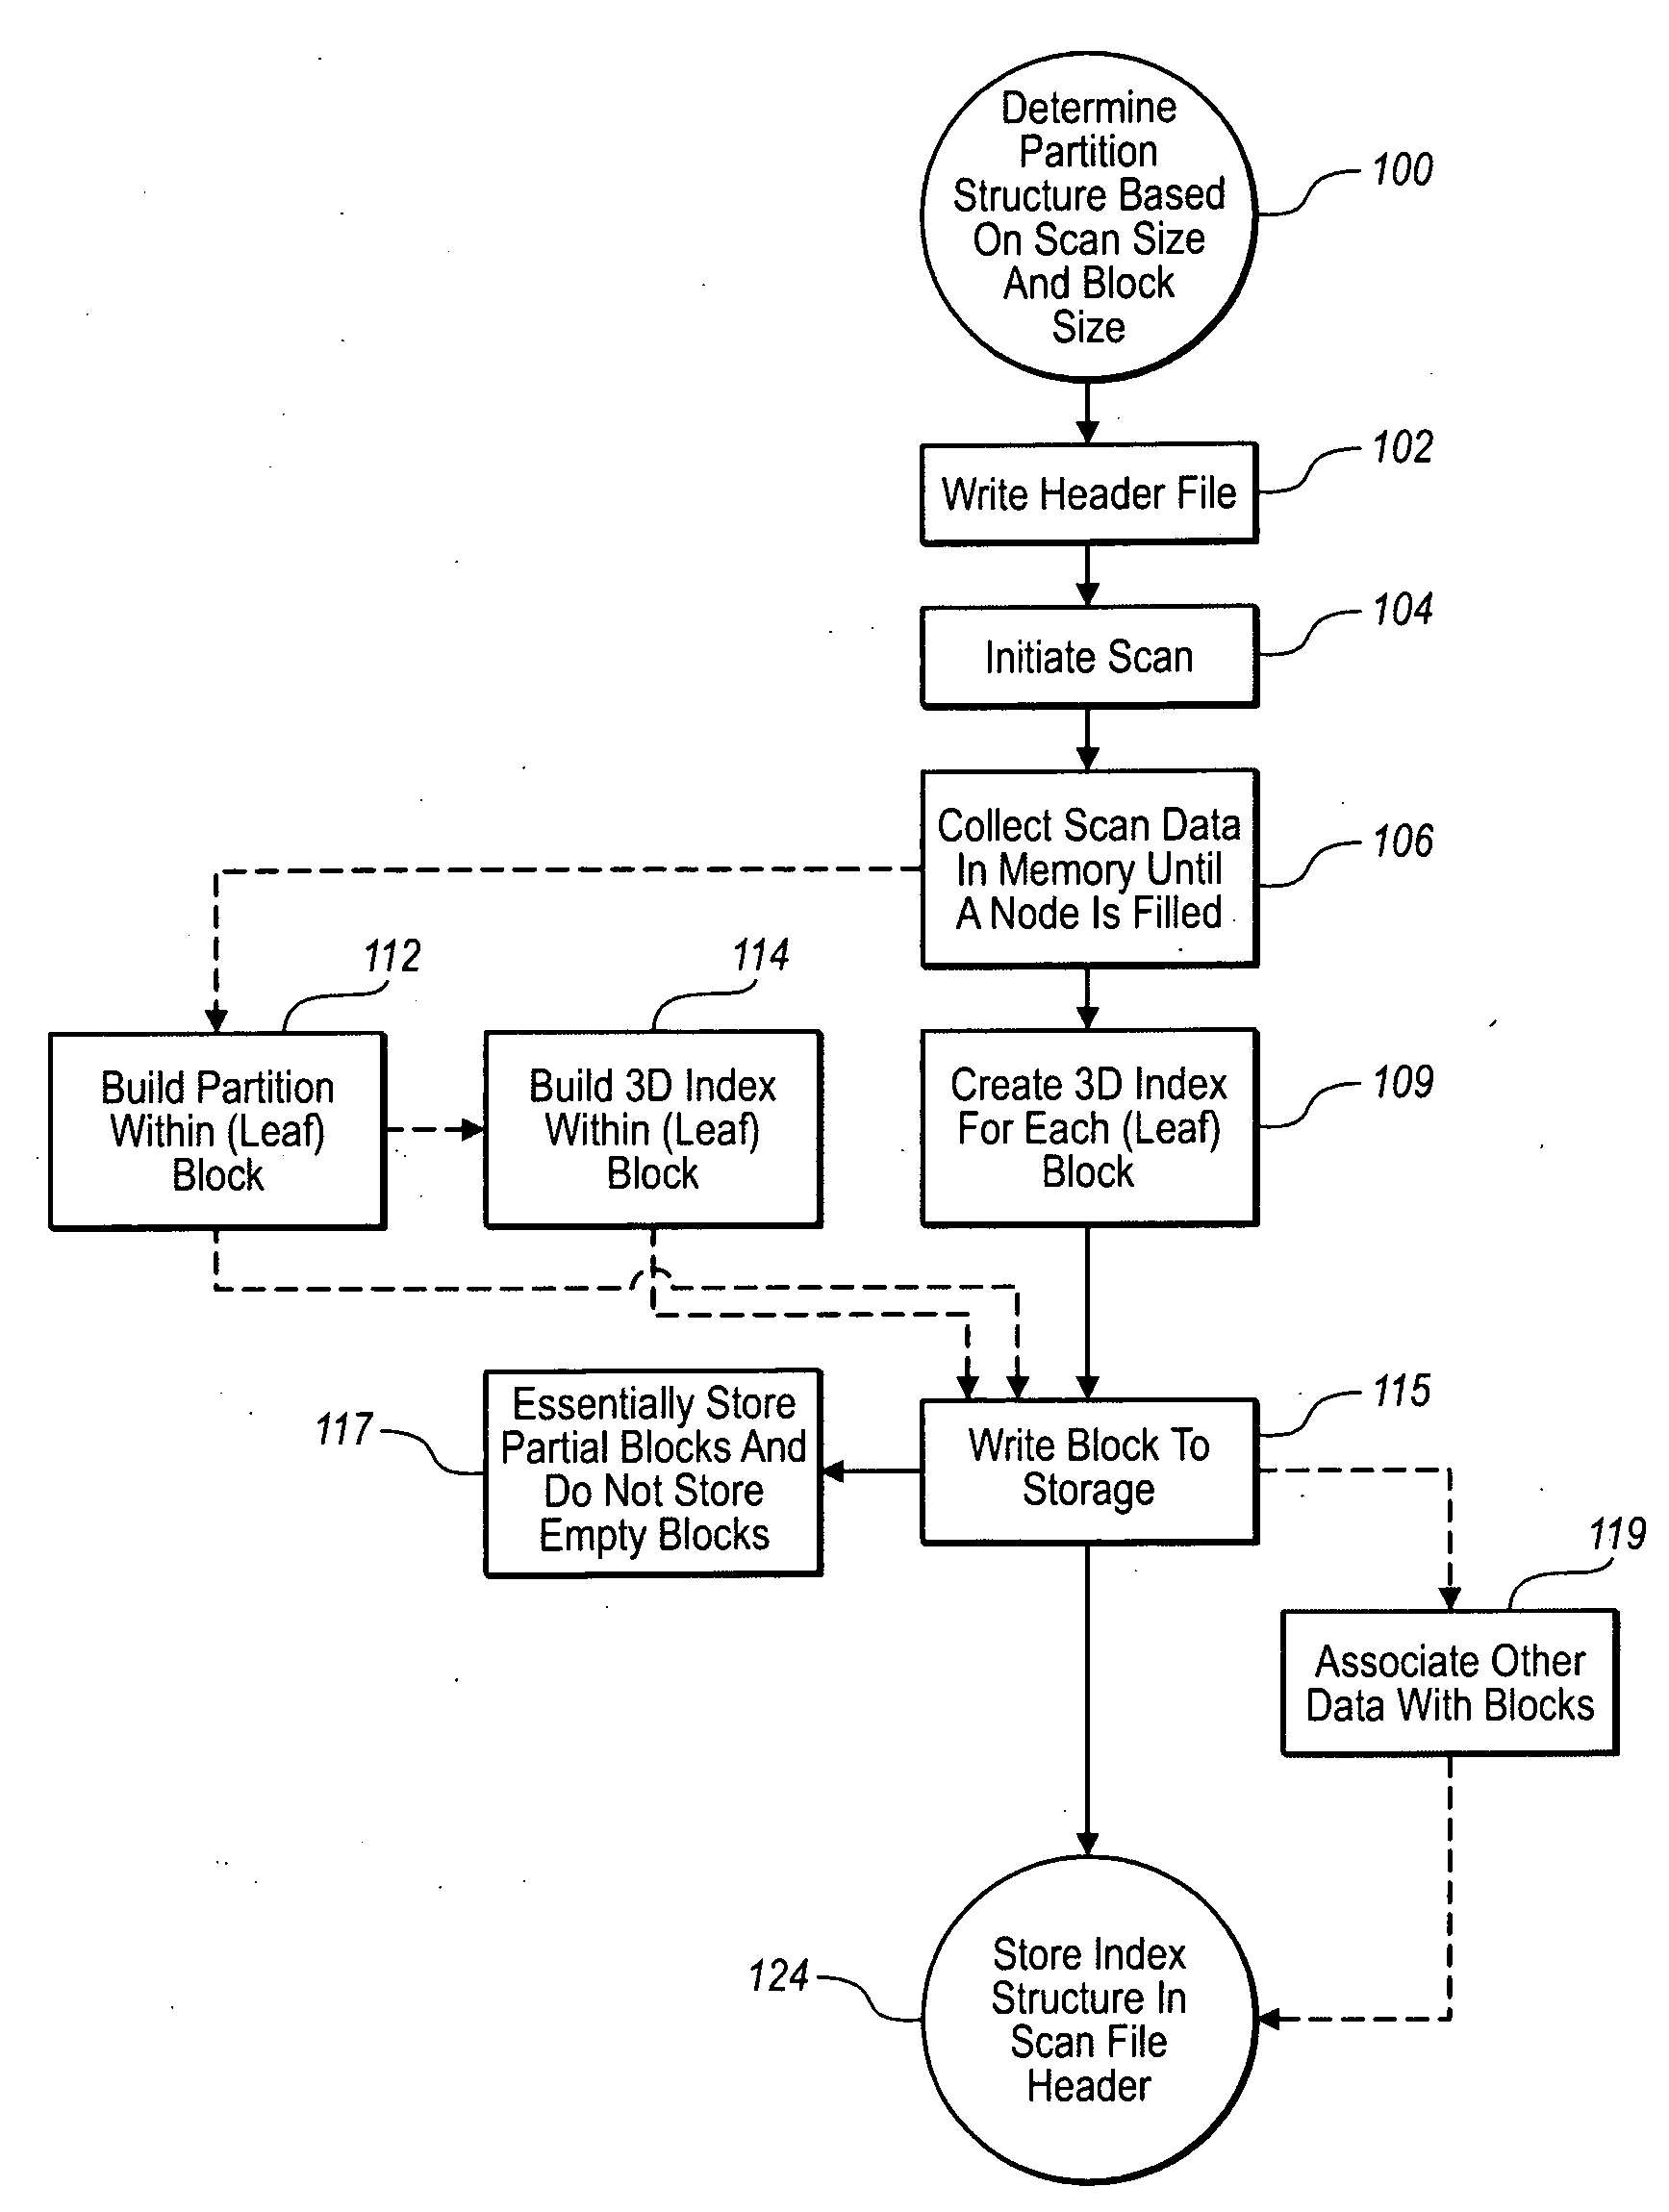 Rapid, spatial-data viewing and manipulating including data partition and indexing